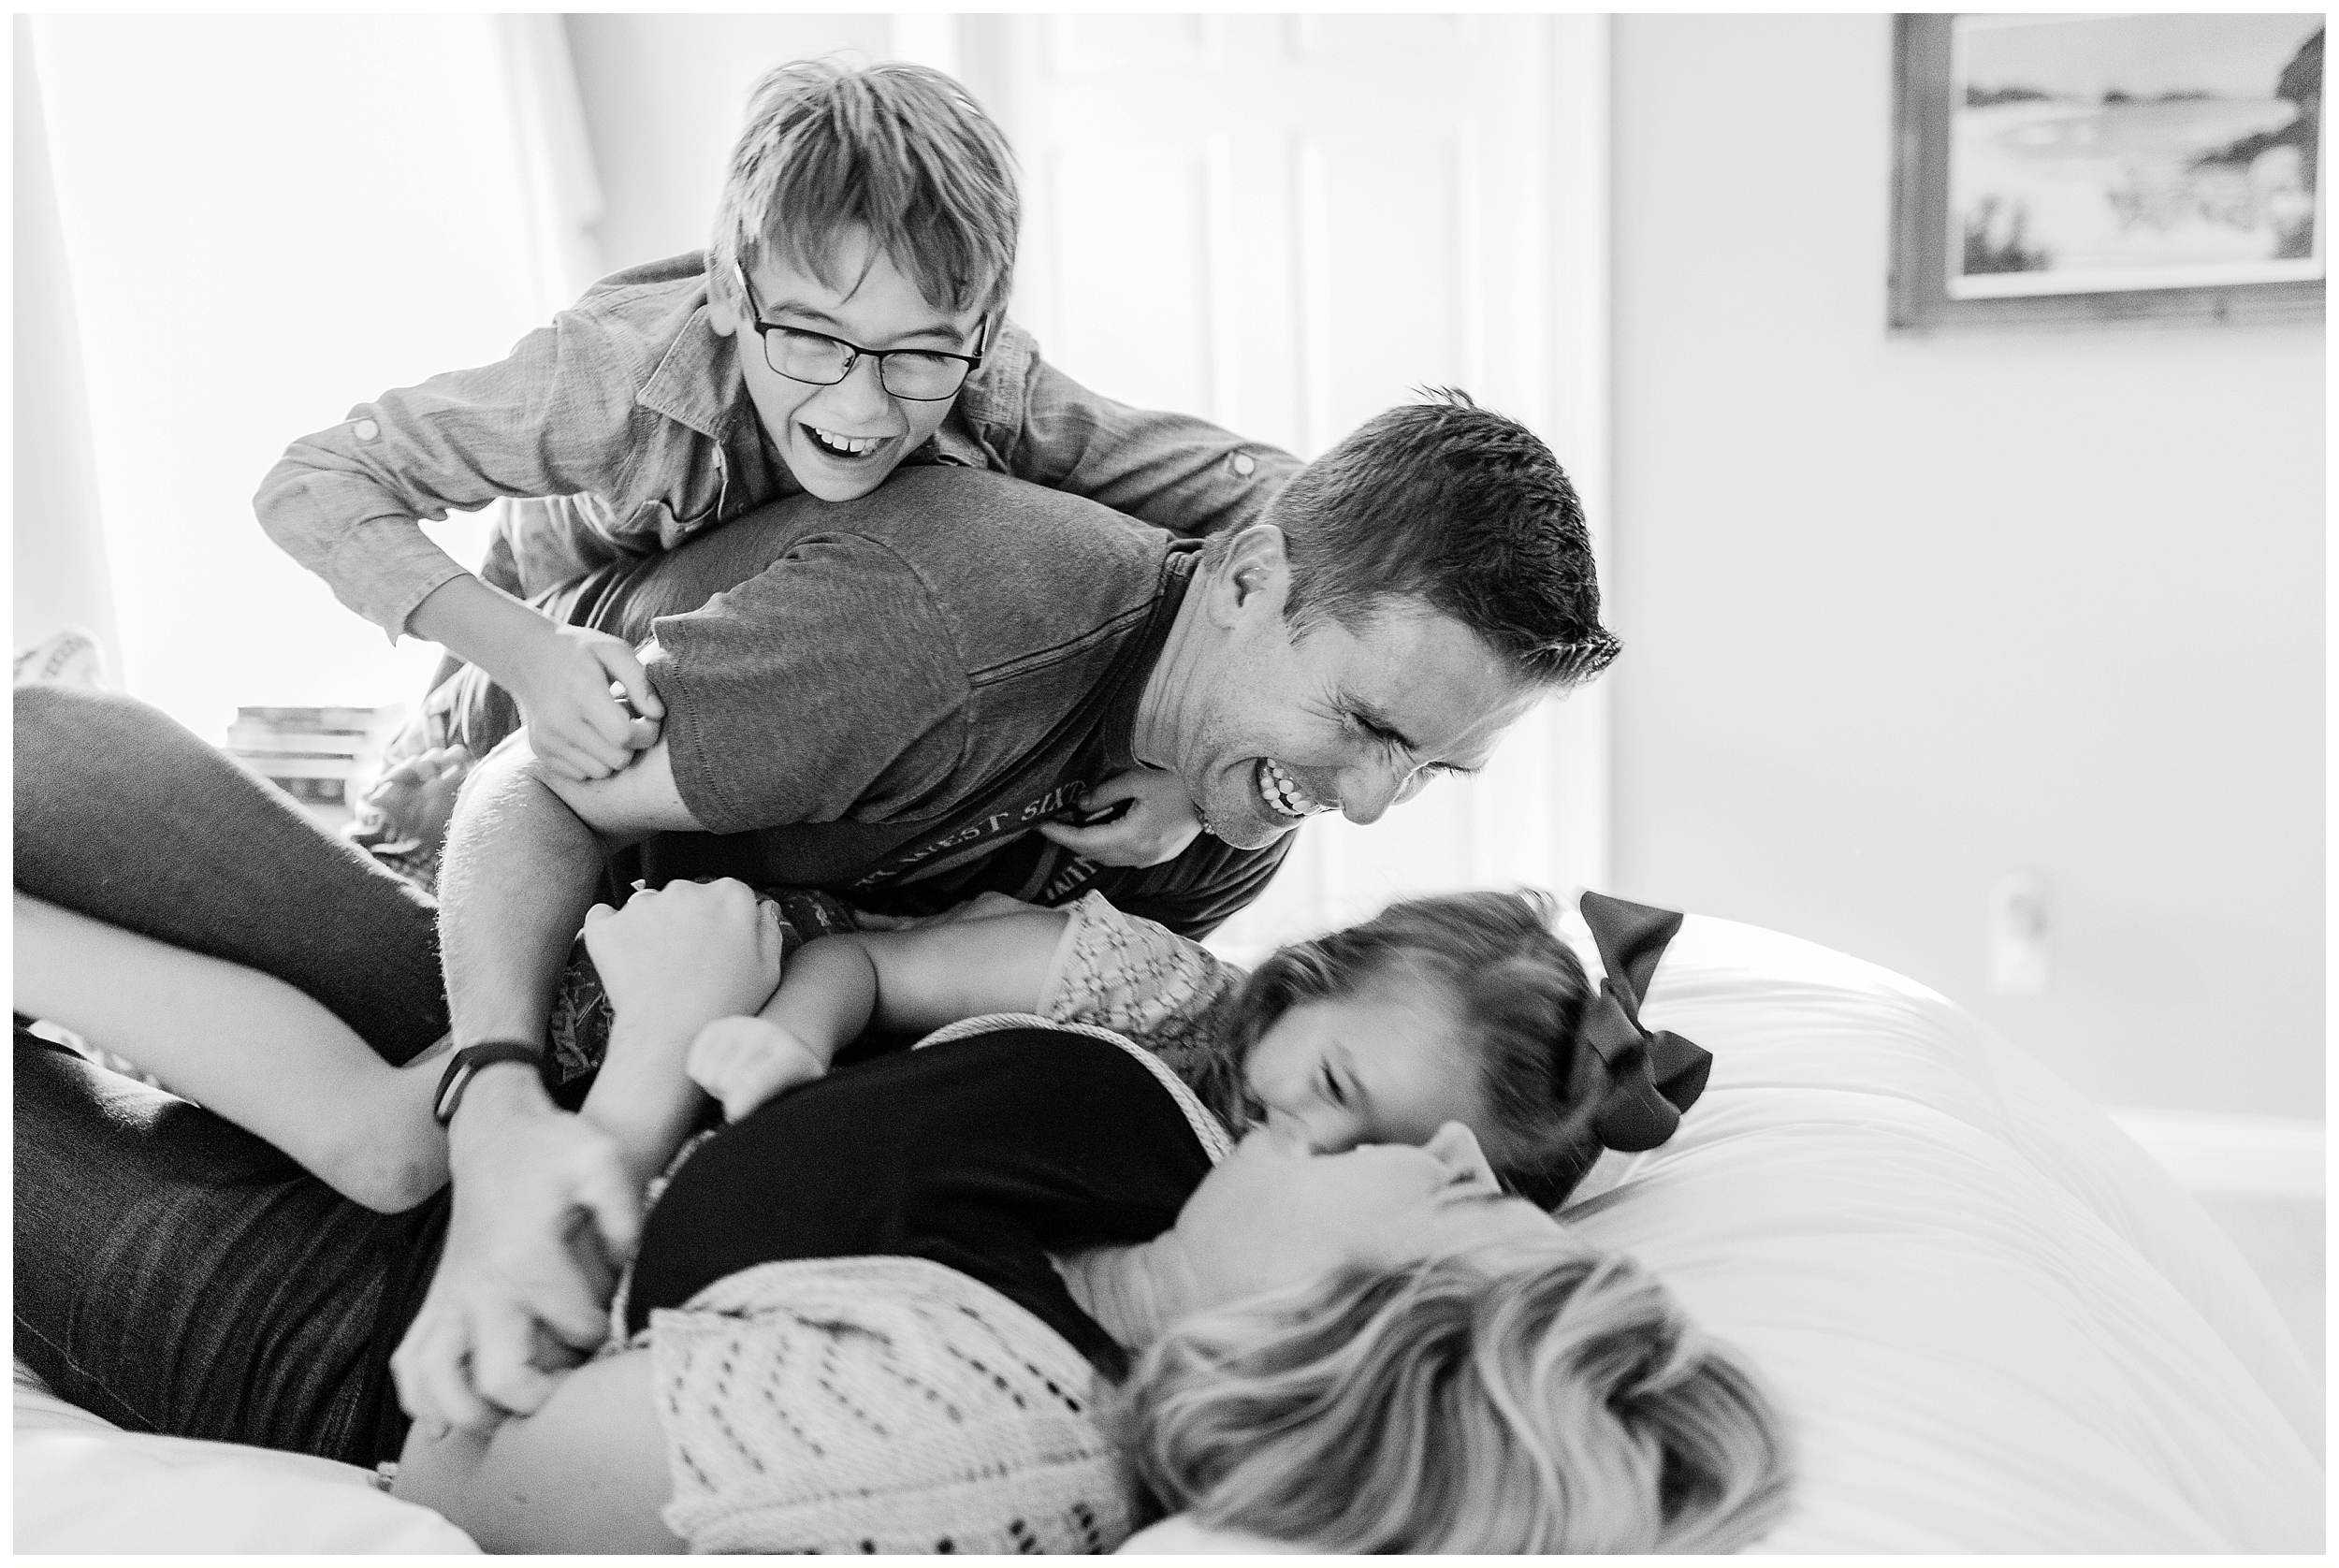  family playing lifestyle photography session by Priscilla Baierlein 